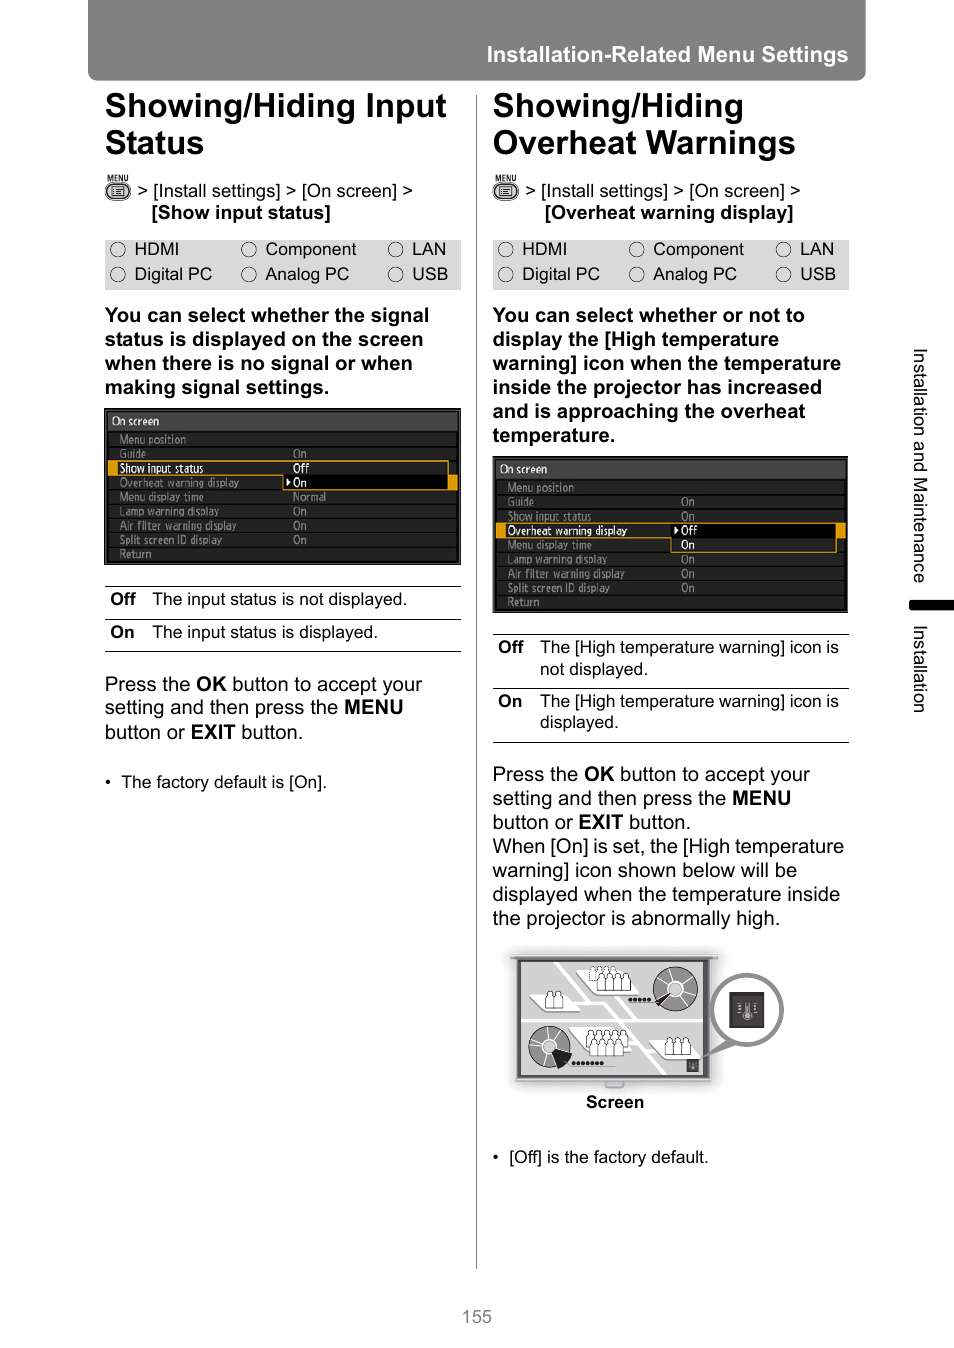 Showing/hiding input status, Showing/hiding overheat warnings | Canon XEED WUX450 User Manual | Page 155 / 314